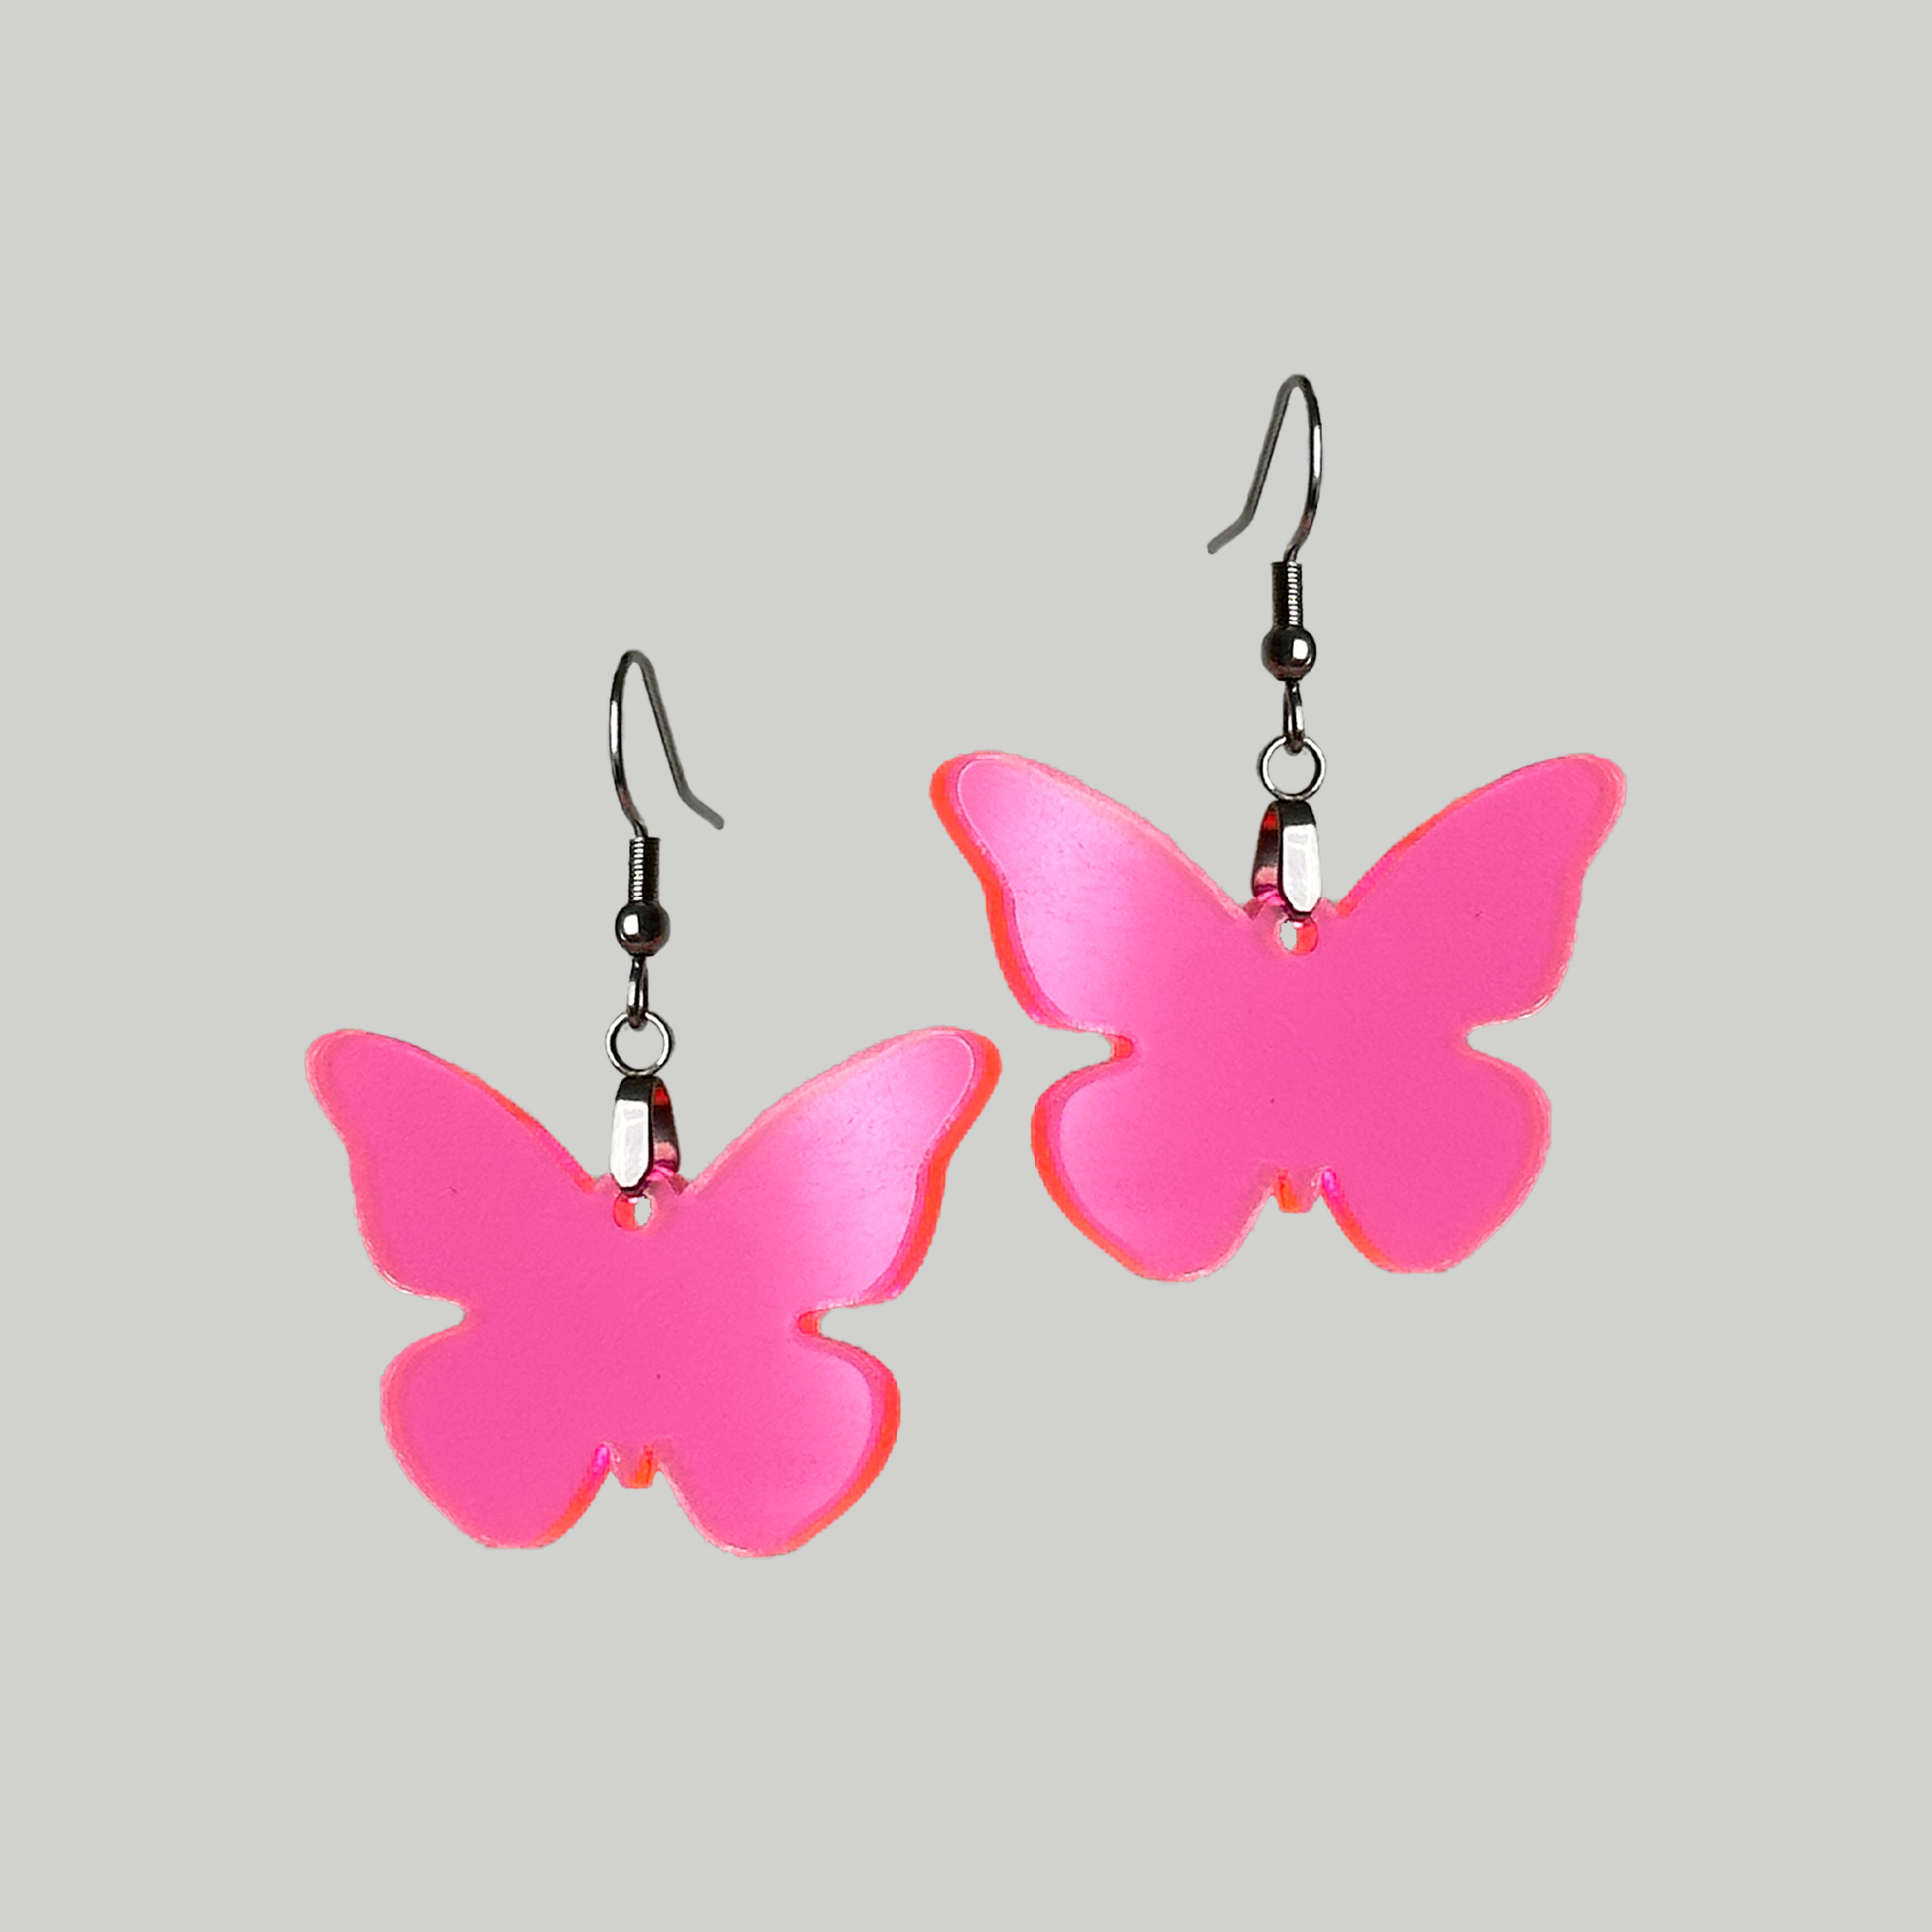 Winged Beauties: Elegant butterfly earrings designed to add a touch of charm and beauty to your ensemble.